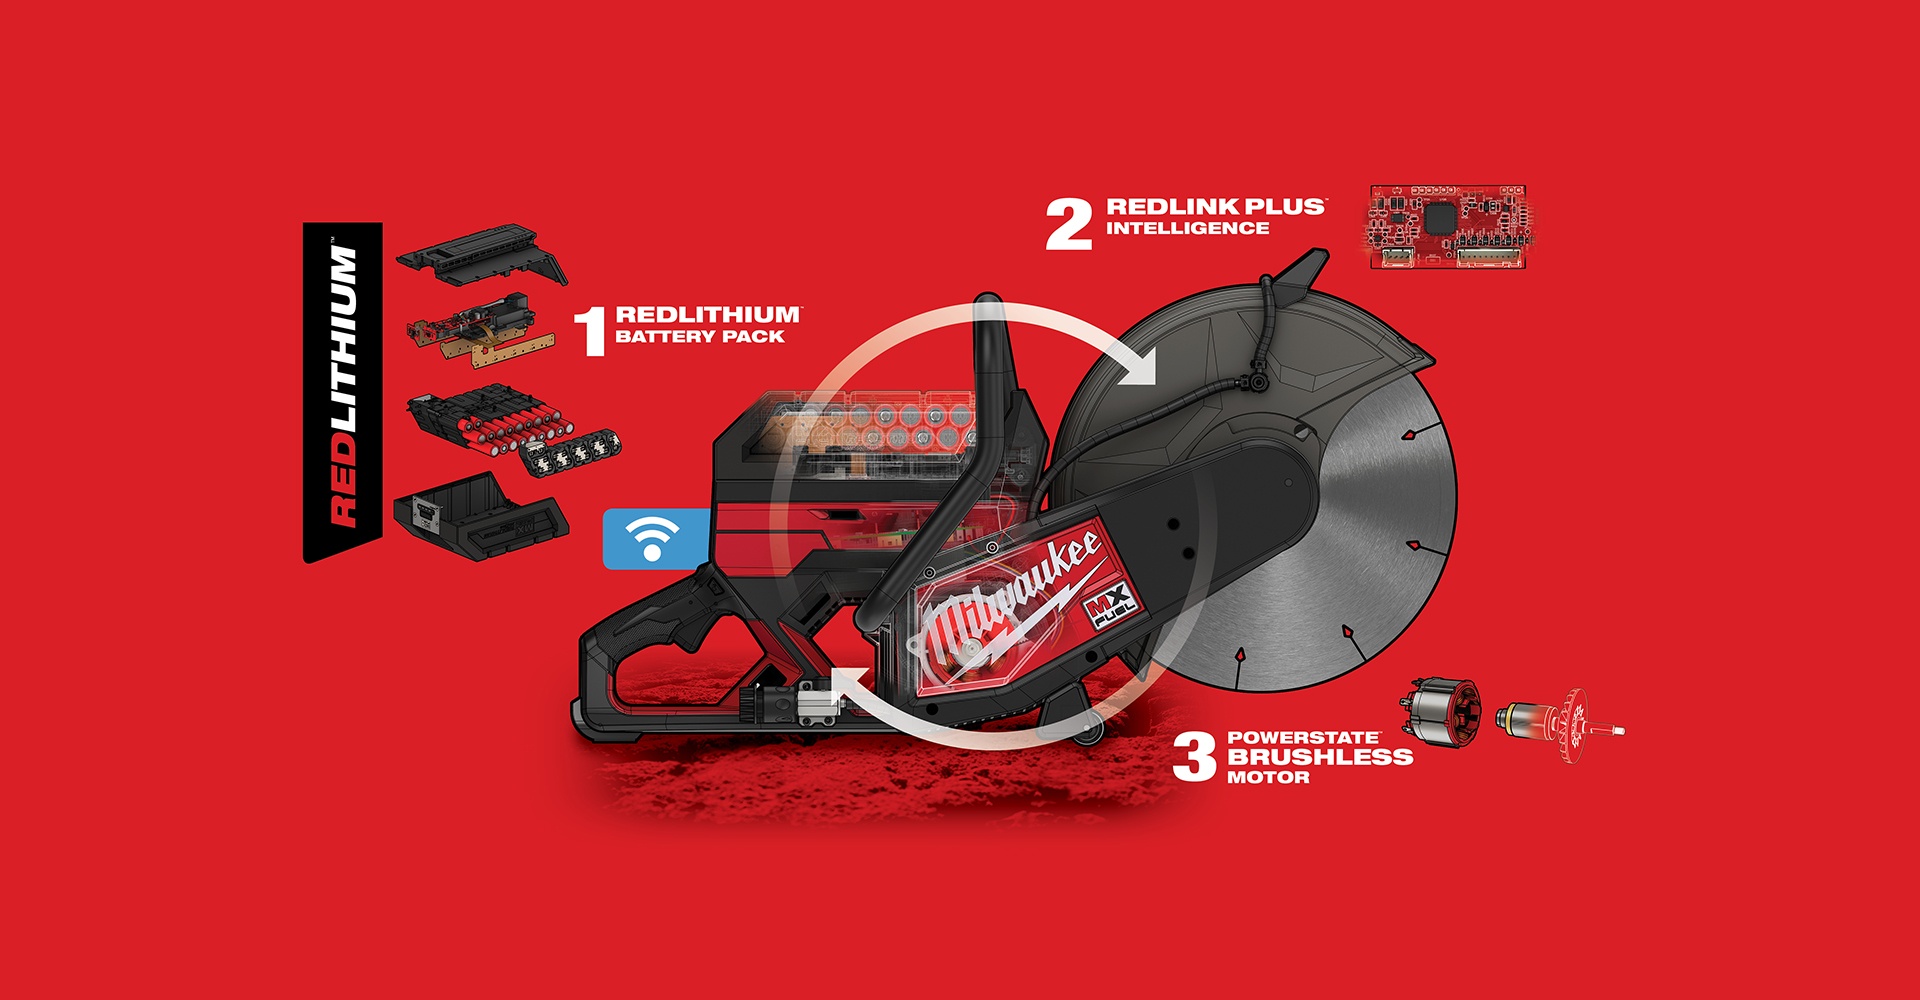 Red Lithium, Redlink Plus and Powerstate brushless